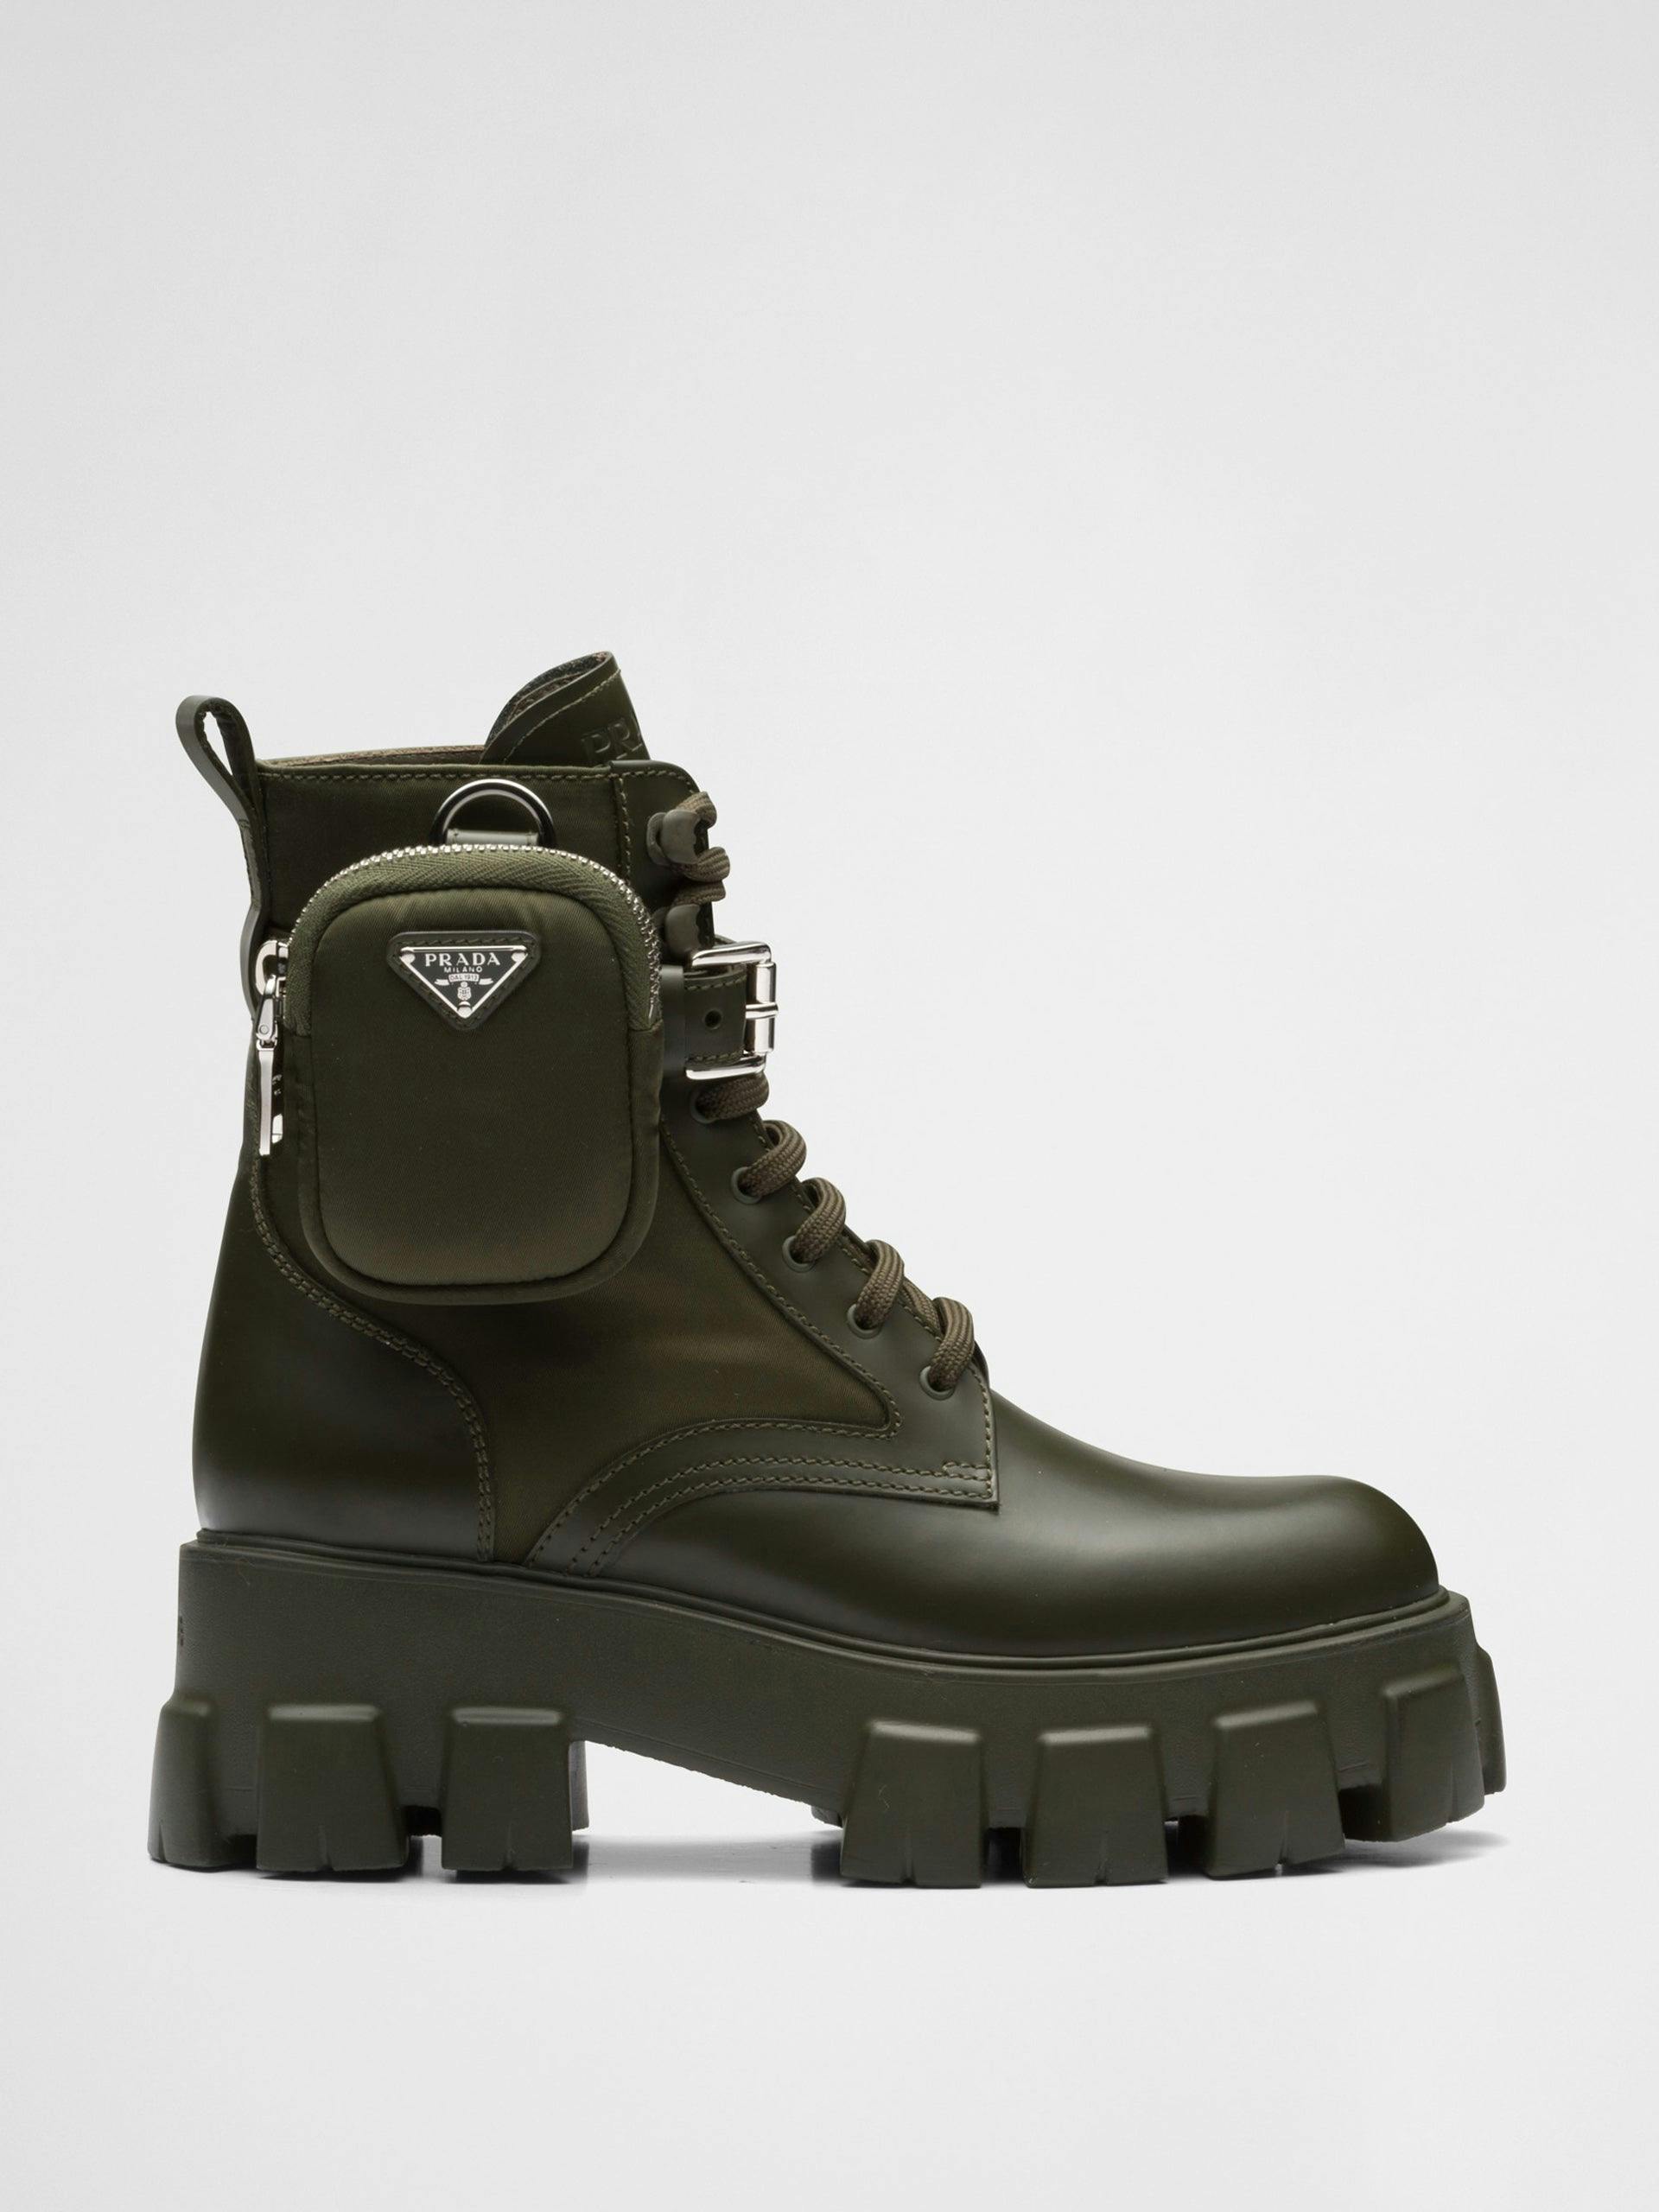 Leather military boots with removable pouch